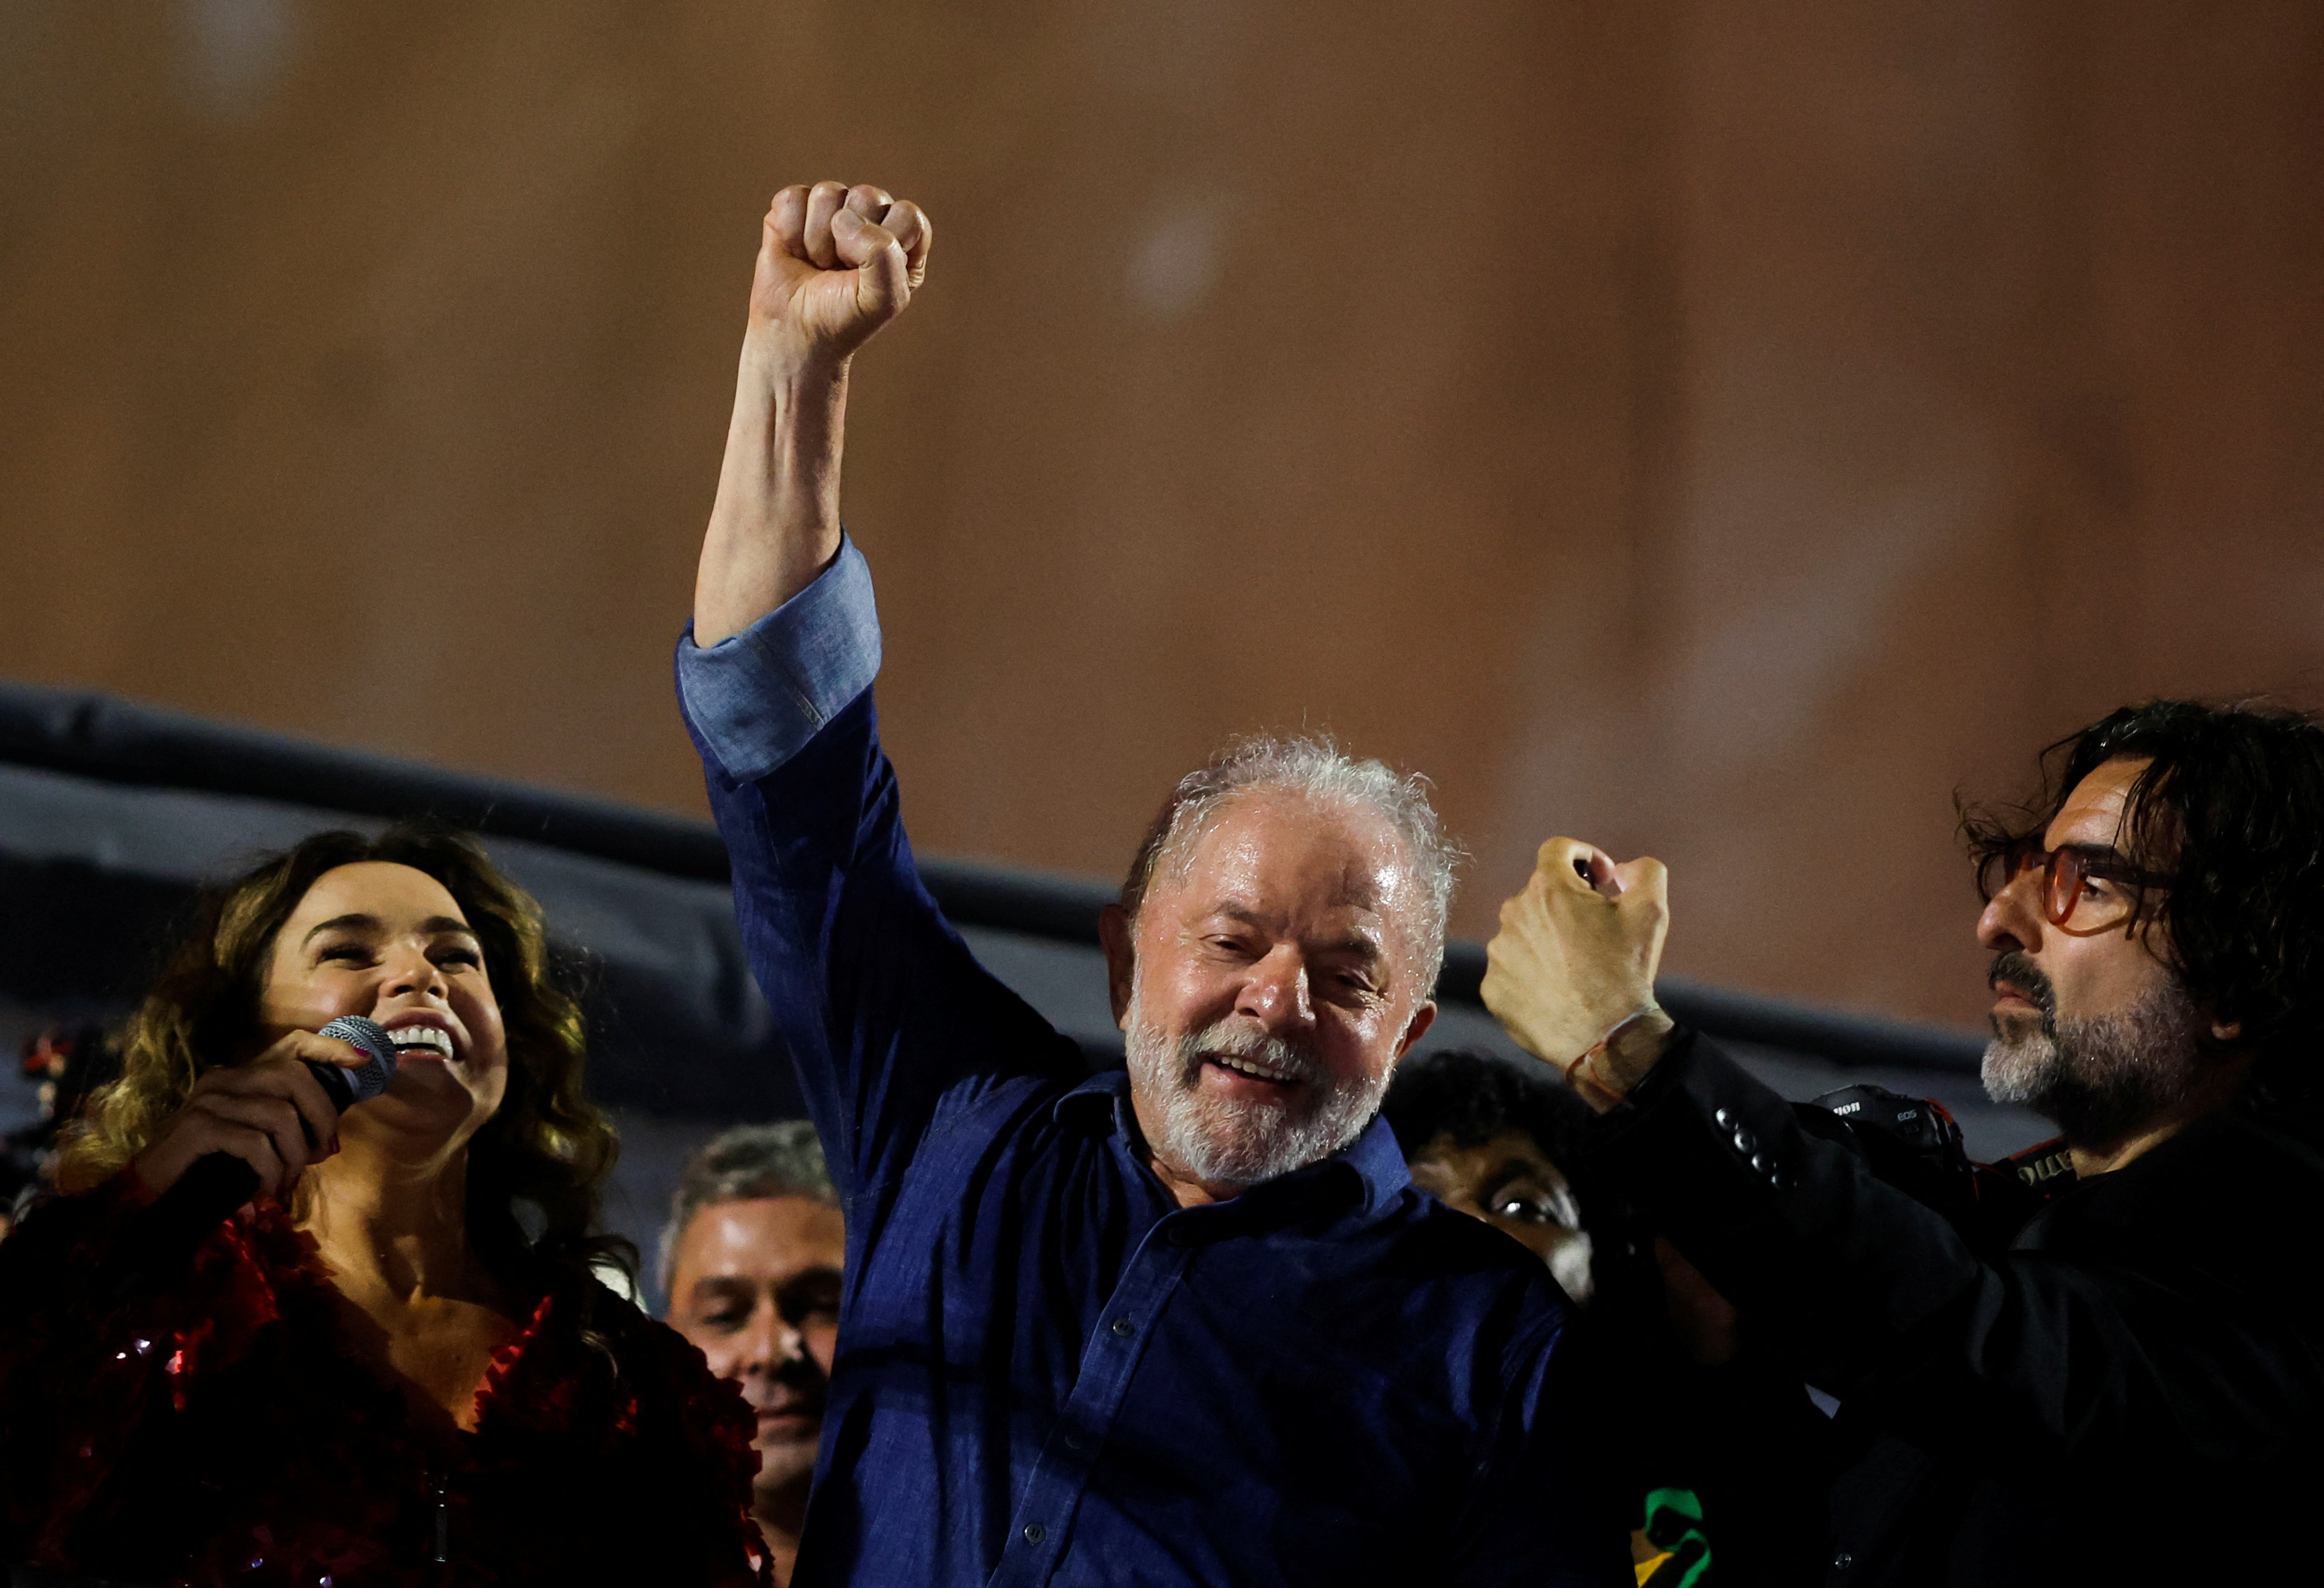 Brazil's former President and presidential candidate Luiz Inacio Lula da Silva gestures at an election night gathering on the day of the Brazilian presidential election run-off, in Sao Paulo, Brazil, October 30, 2022. REUTERS/Amanda Perobelli